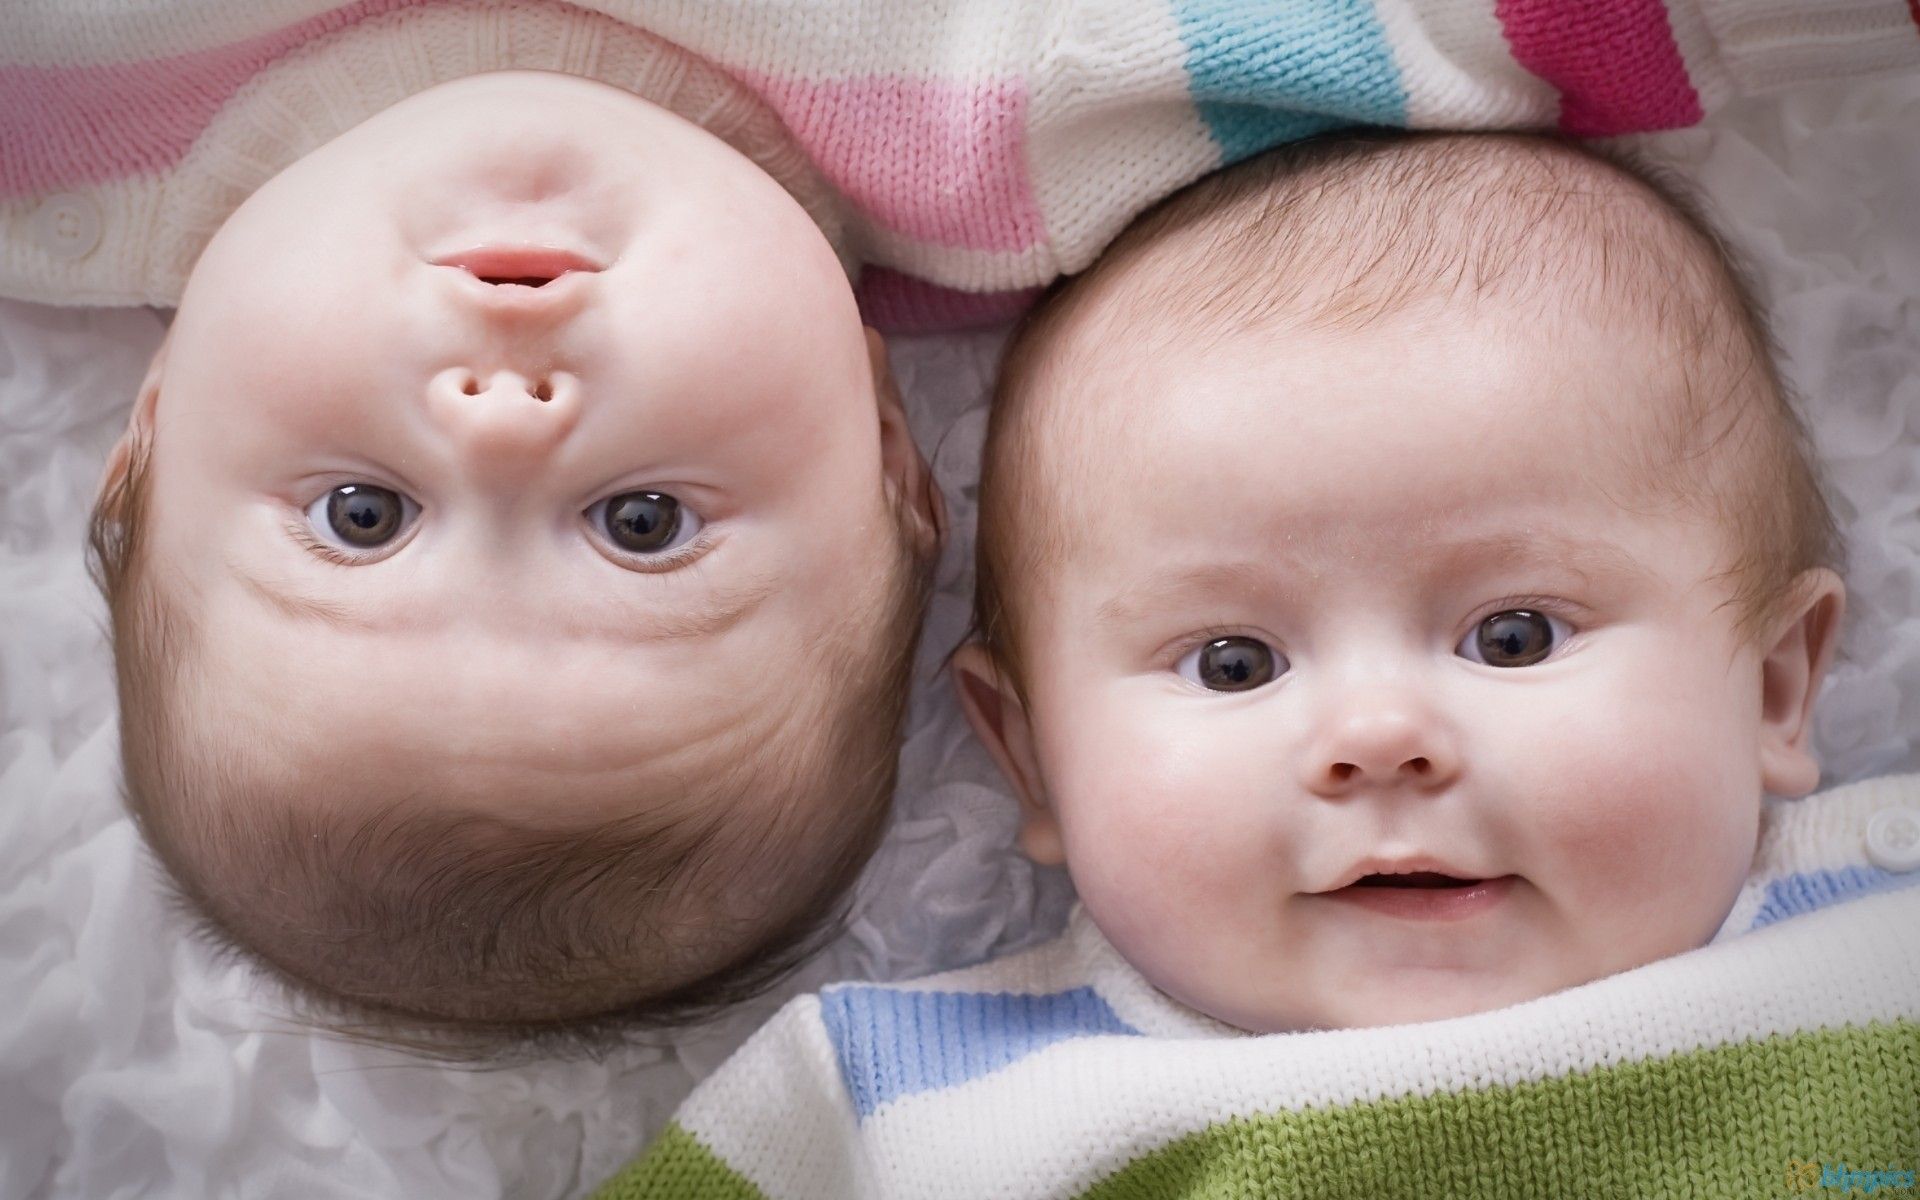 Cute Baby Love Wallpaper For Facebook. Cute Twins, Cute Twin Babies, Funny Baby Picture